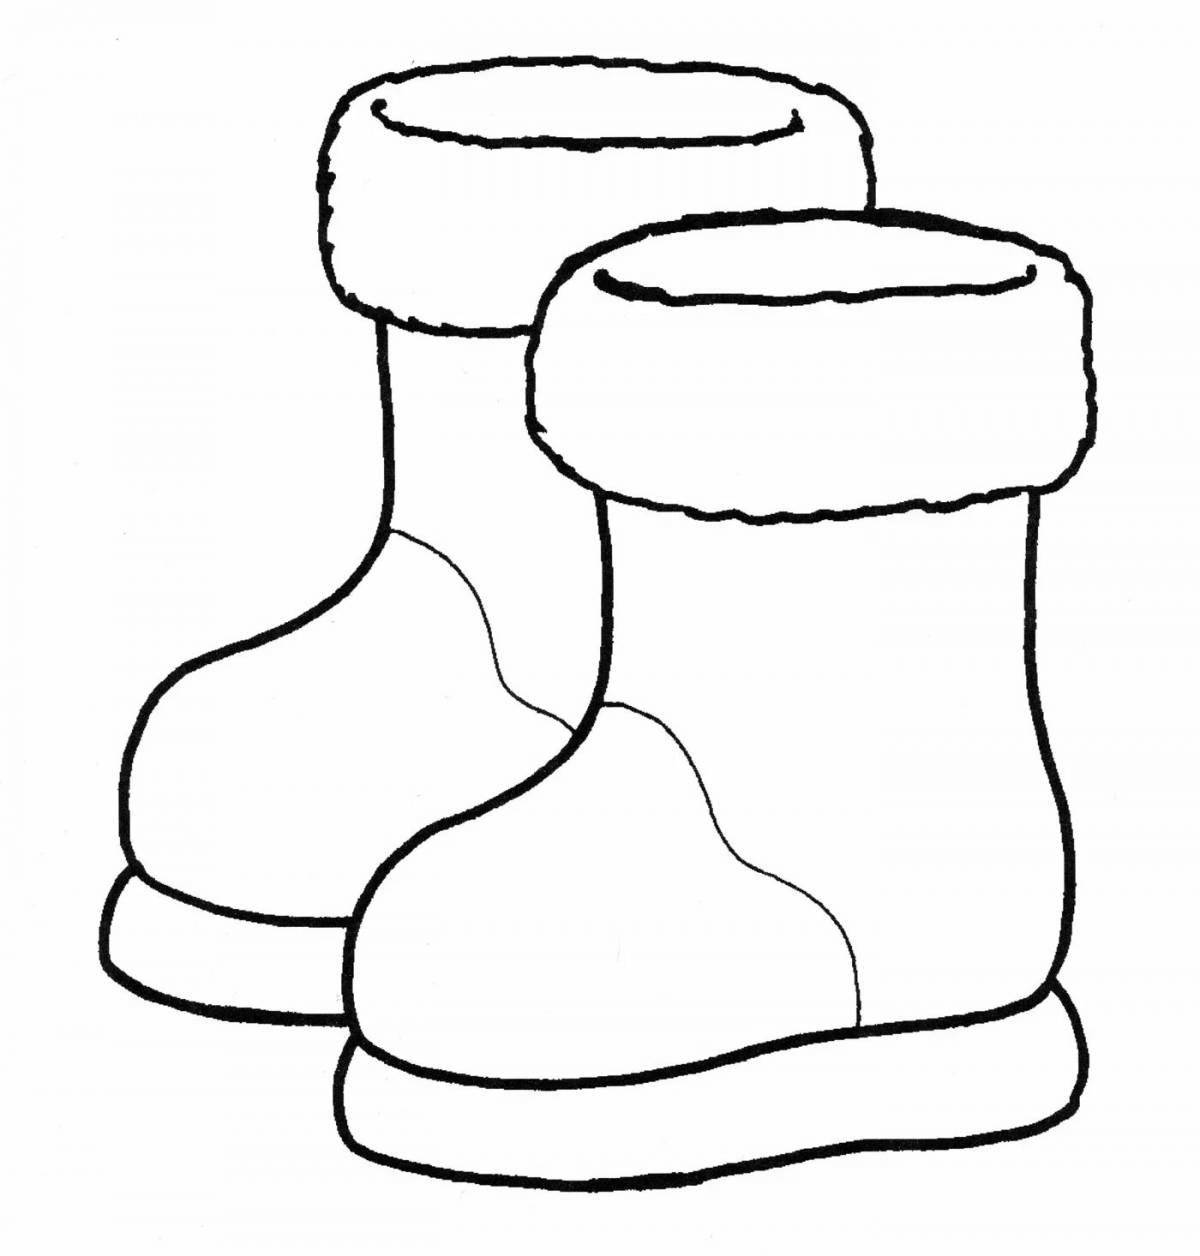 Coloring page beautiful shoes for children 3-4 years old